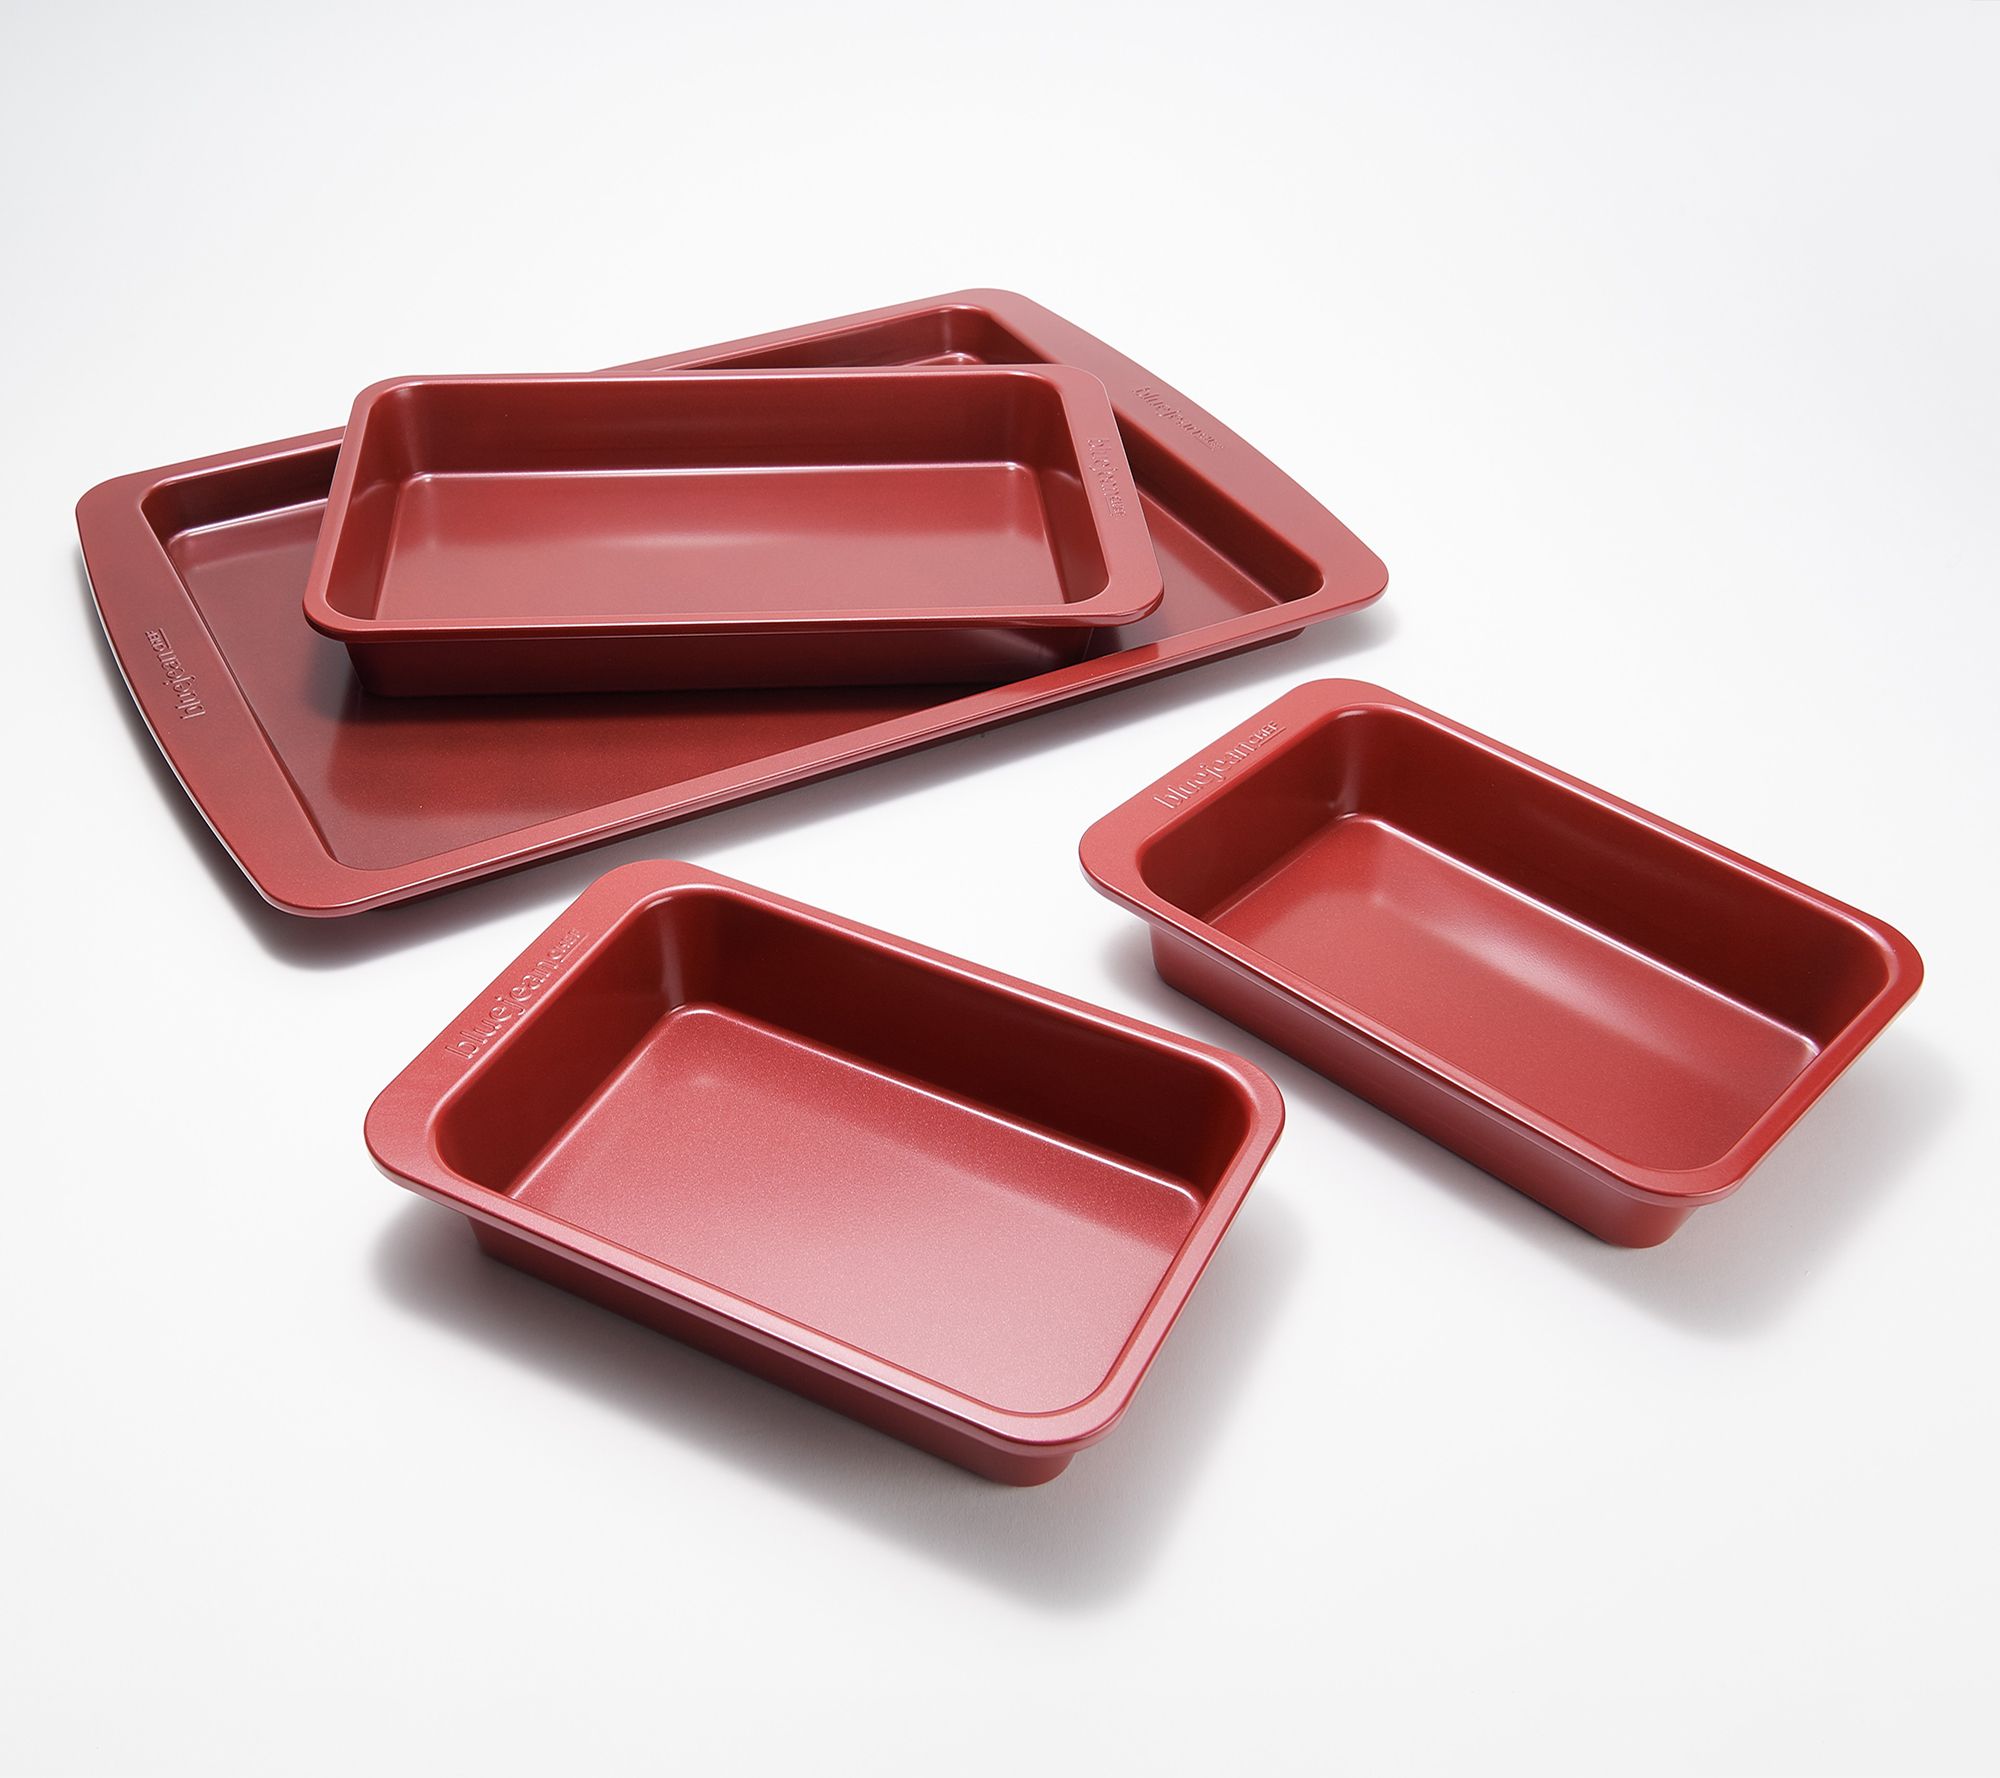 Happy Go Marni: Facing My Fear of Silicone Bakeware